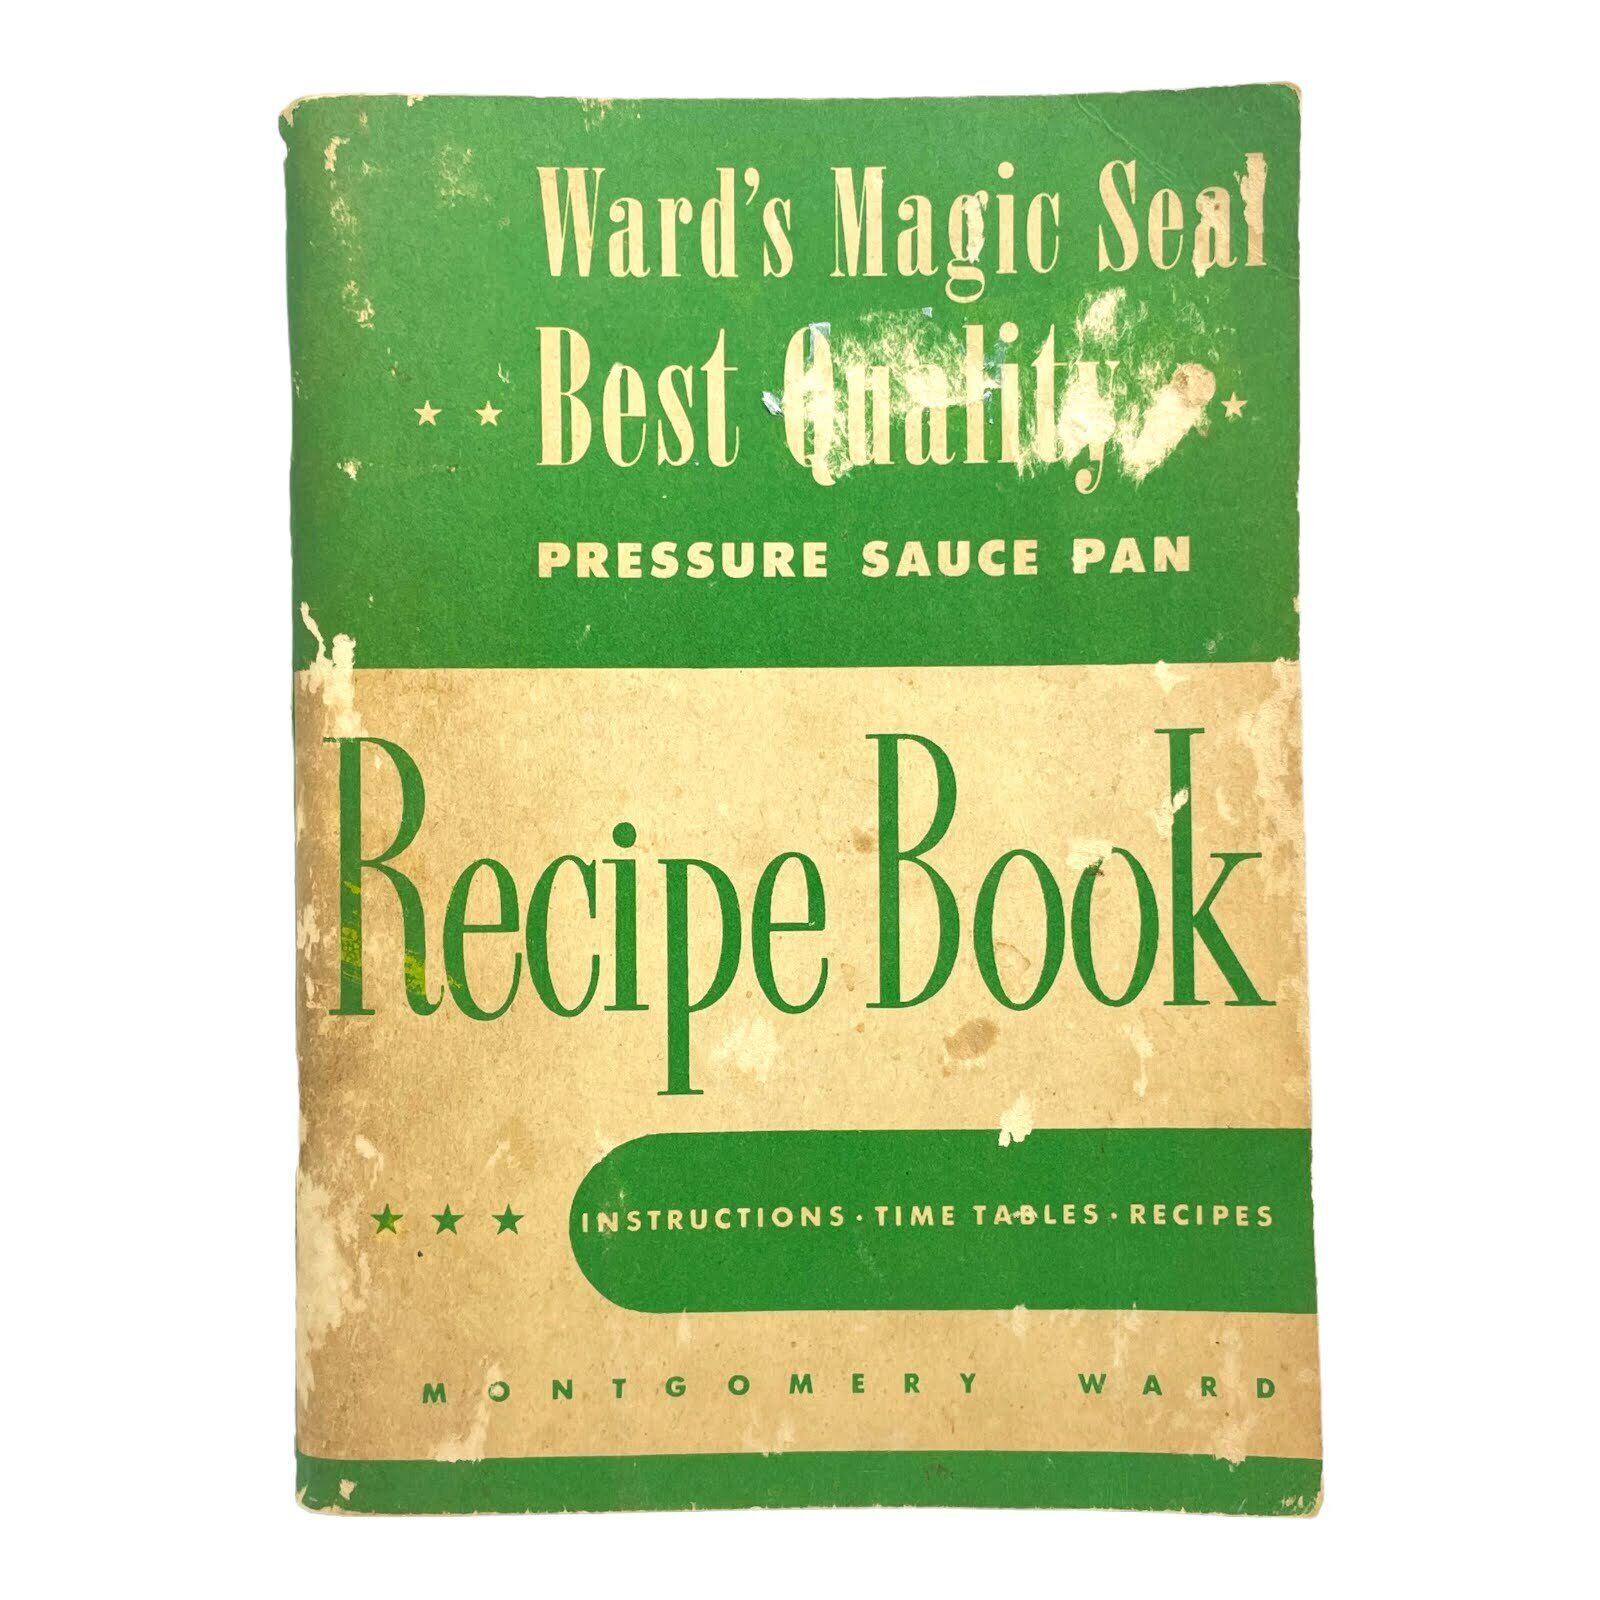 Vintage 1948 WARD\'S MAGIC SEAL RECIPE BOOK for Best Quality Pressure Sauce Pan